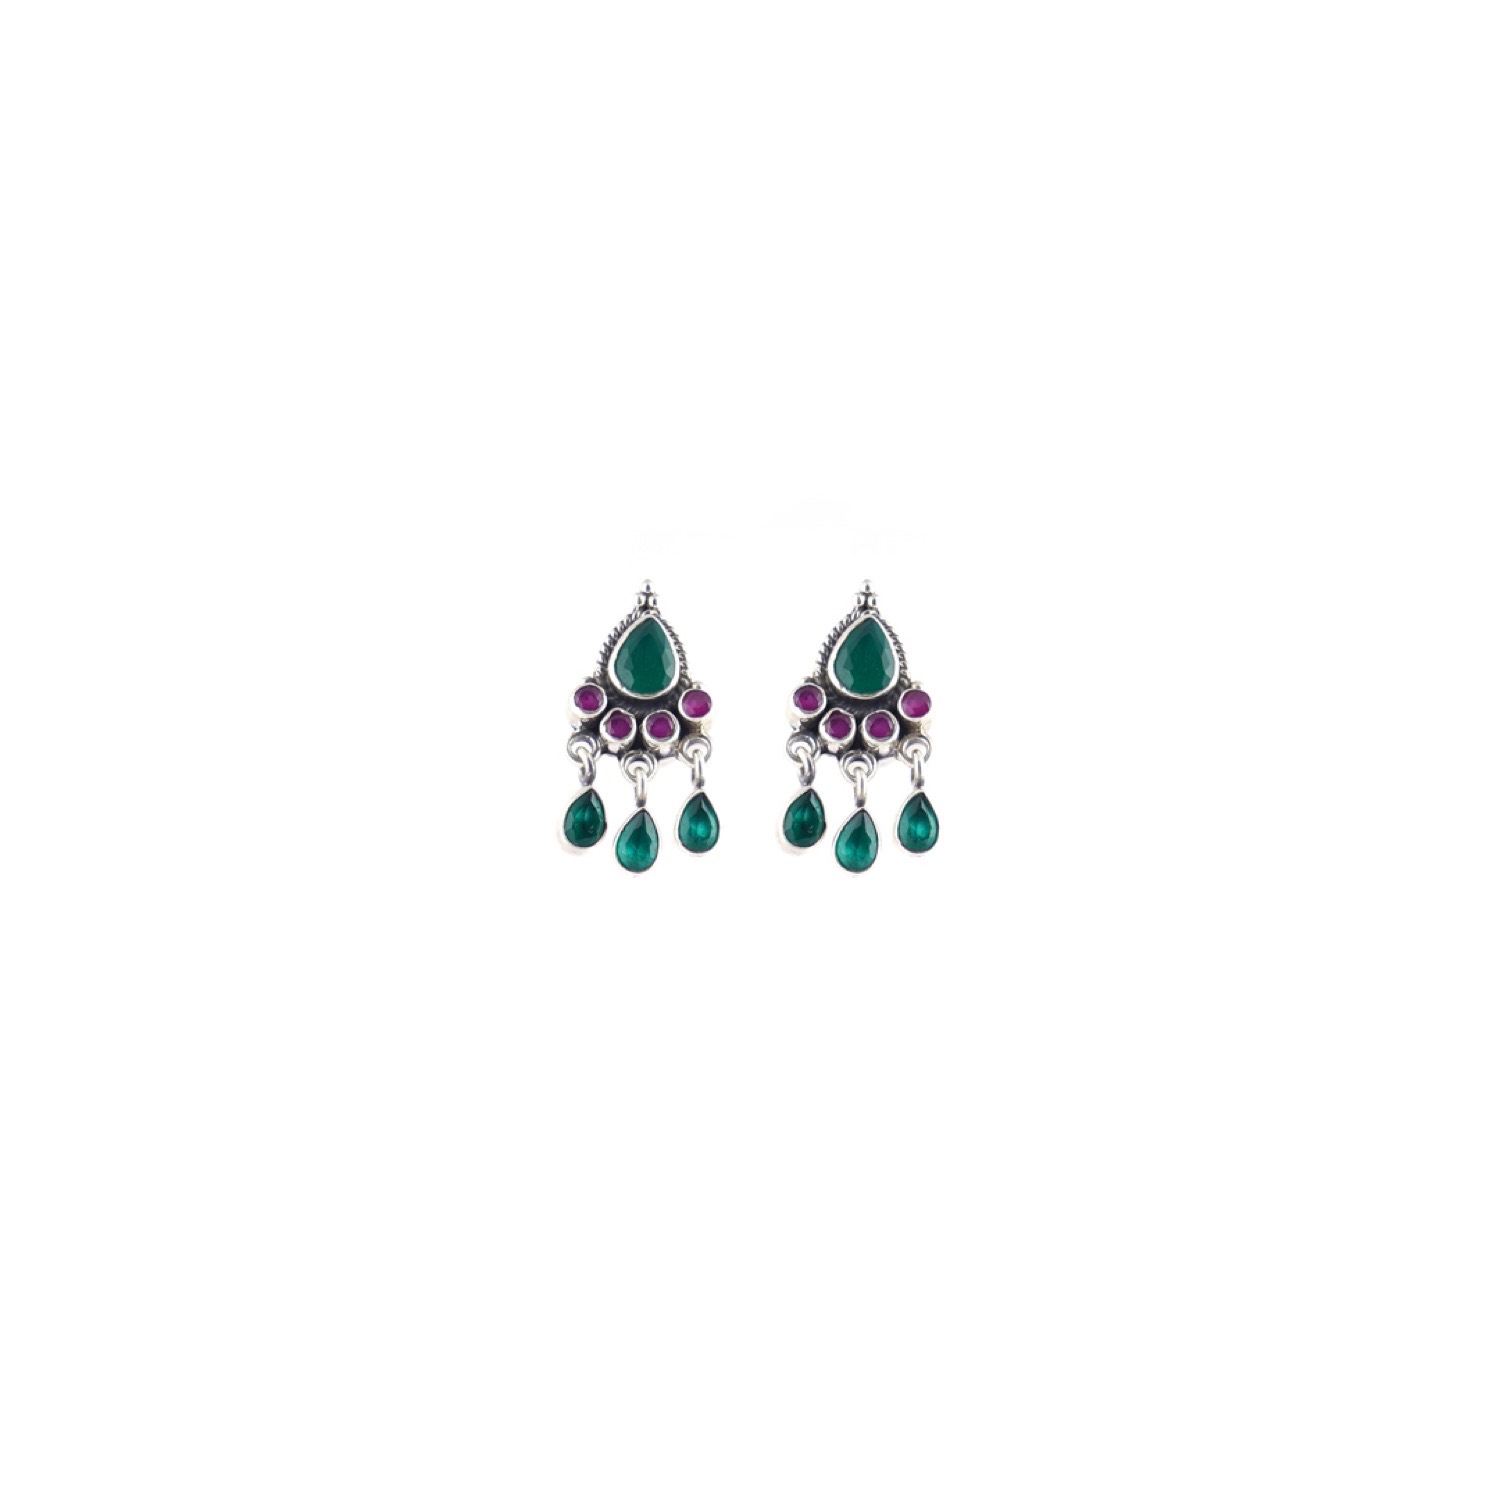 varam_earrings_102022_pear_and_round_cut_green_and_pink_stone_antique_silver_earrings-1